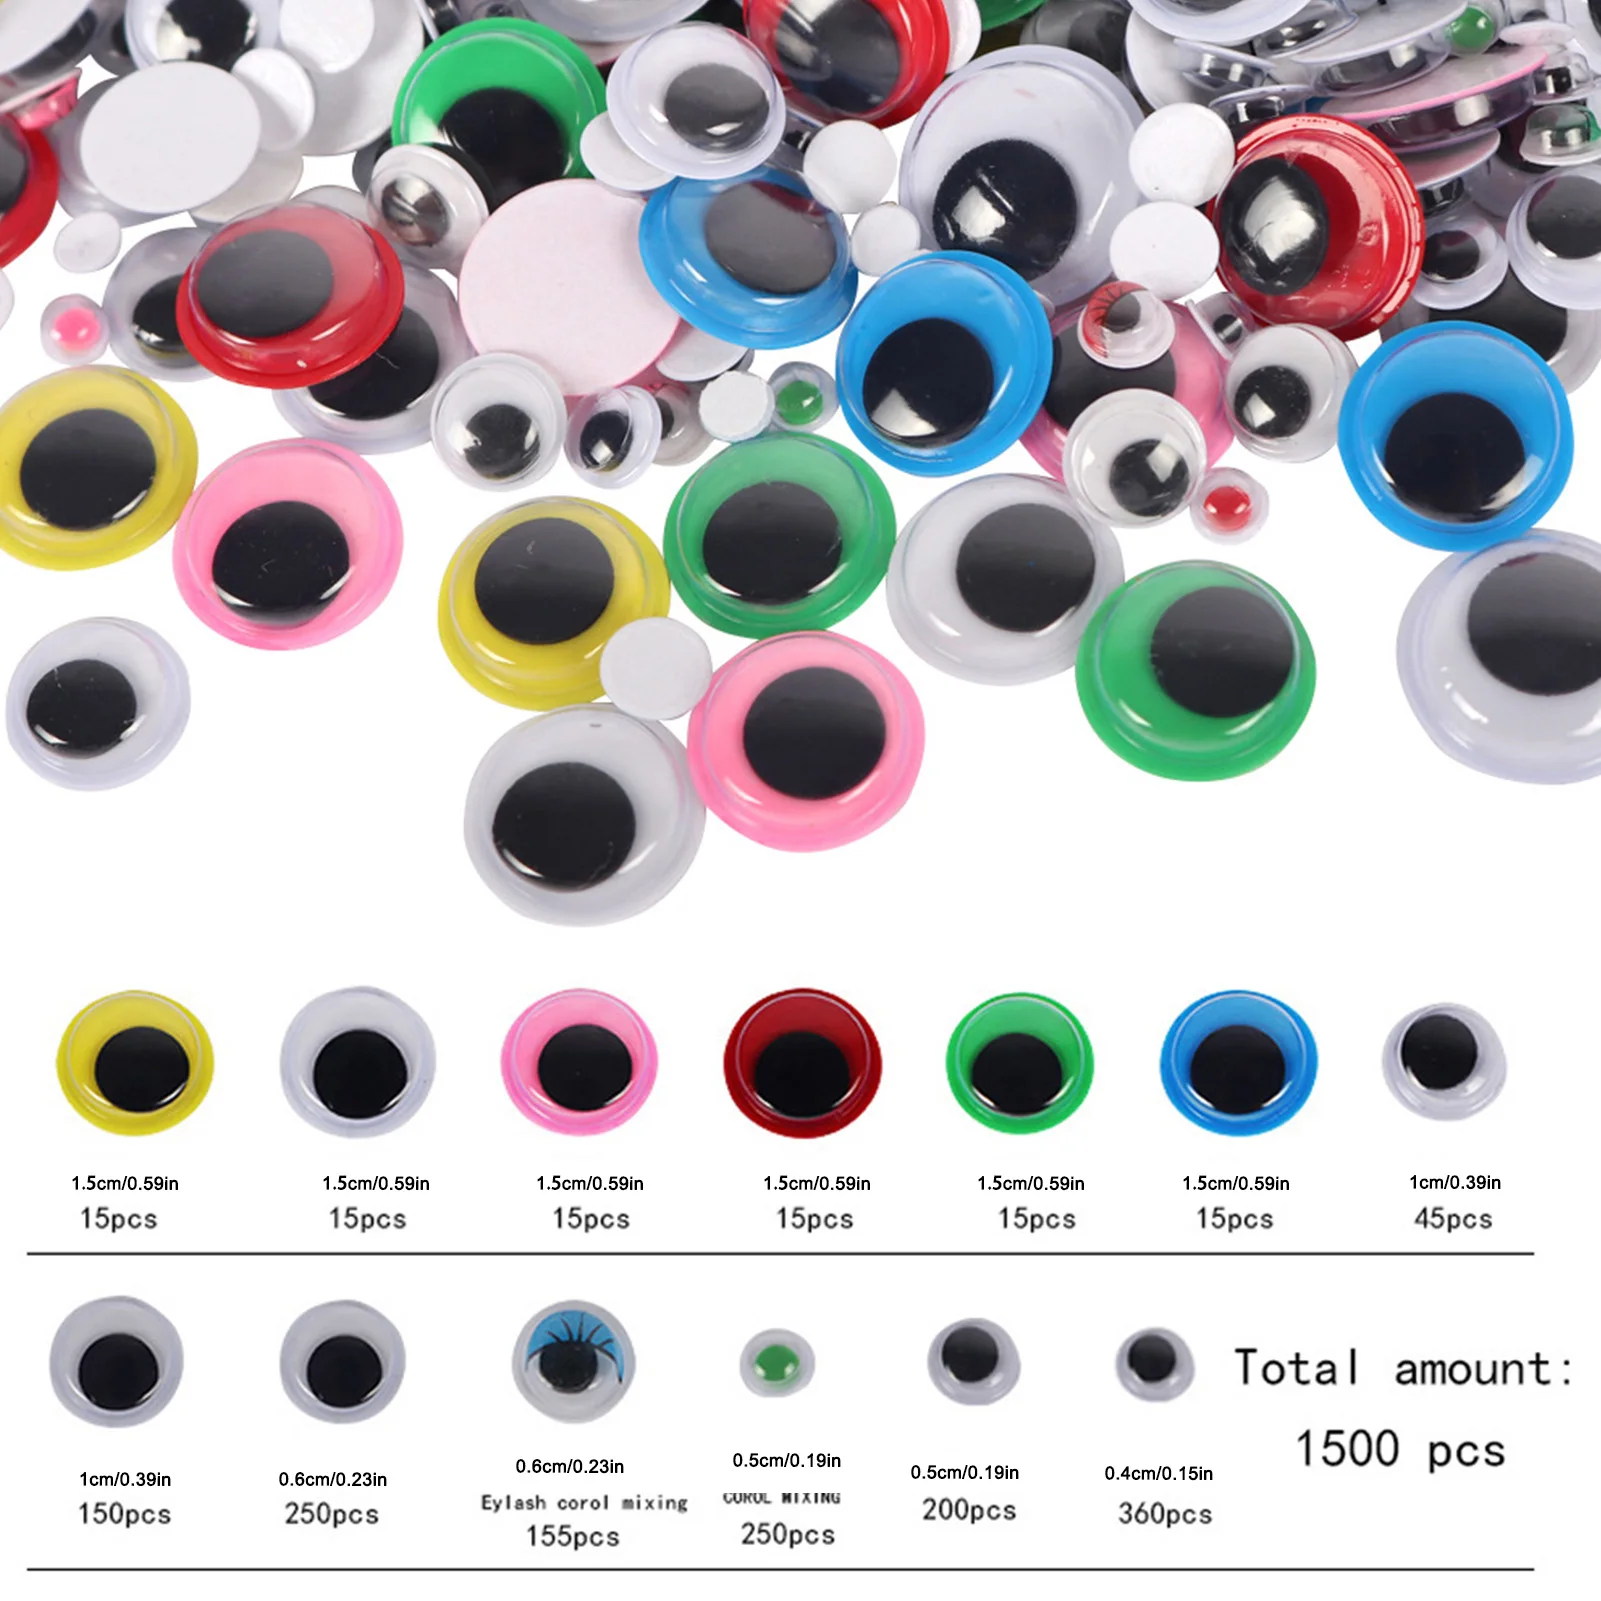 https://ae01.alicdn.com/kf/Se7d1c1ae5bd54e529a0195d5c30746de5/Colorful-Self-Adhesive-Googly-Wiggle-Eyes-1500-Pieces-Multi-Colors-Wiggly-Googly-Eyes-Toy-Accessories-For.jpg